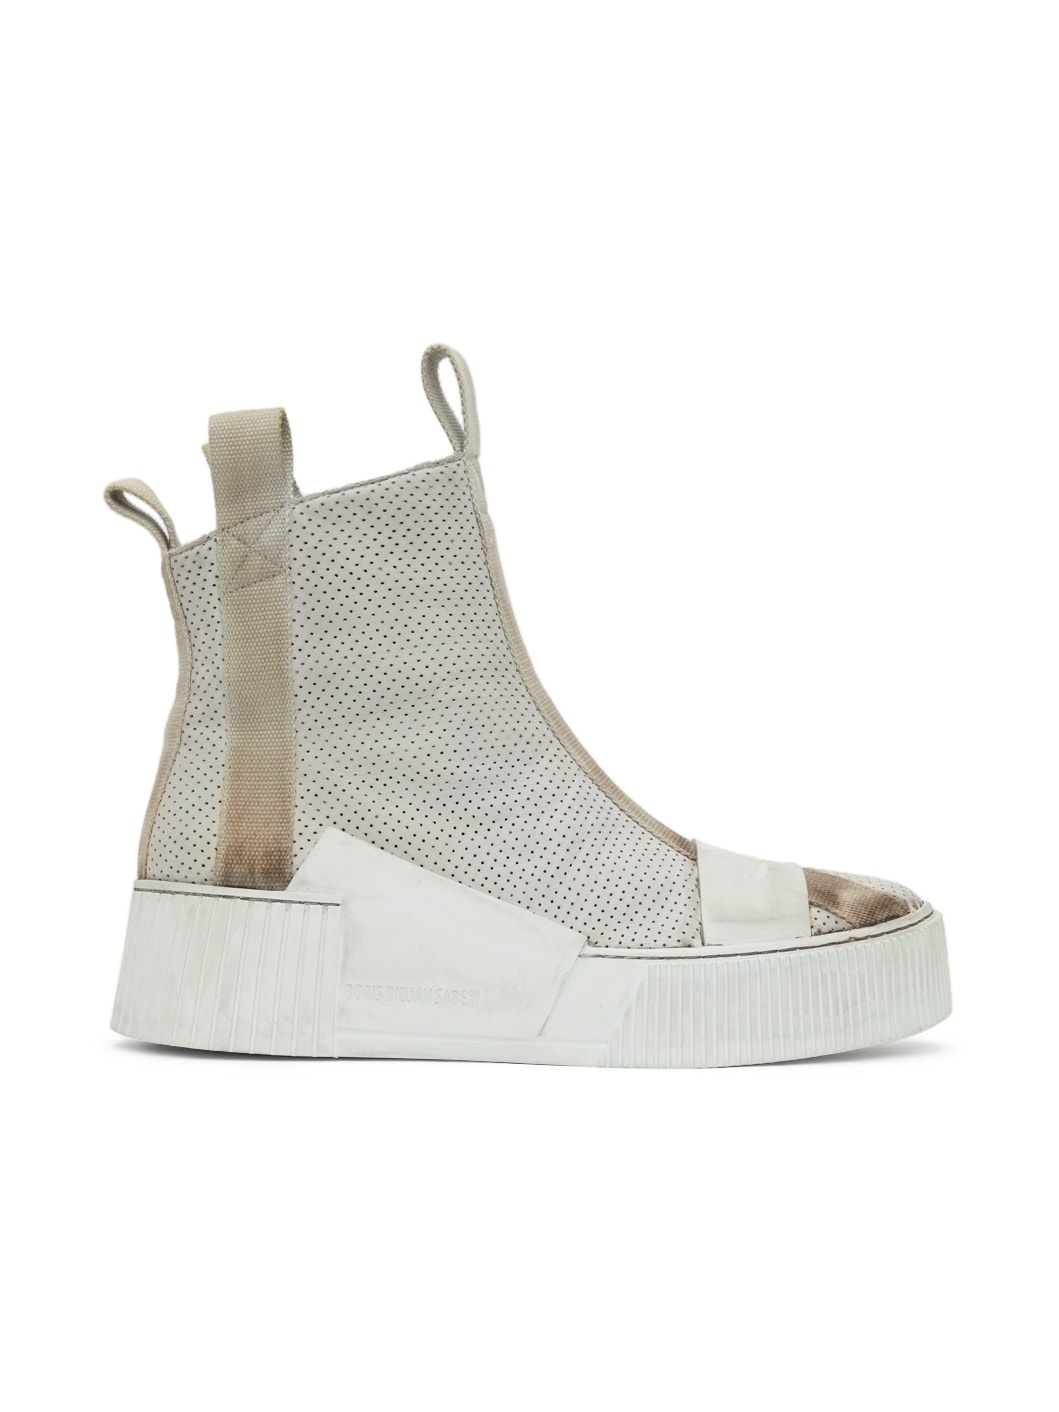 Off-White Bamba 3.1 High Top Sneakers - 1